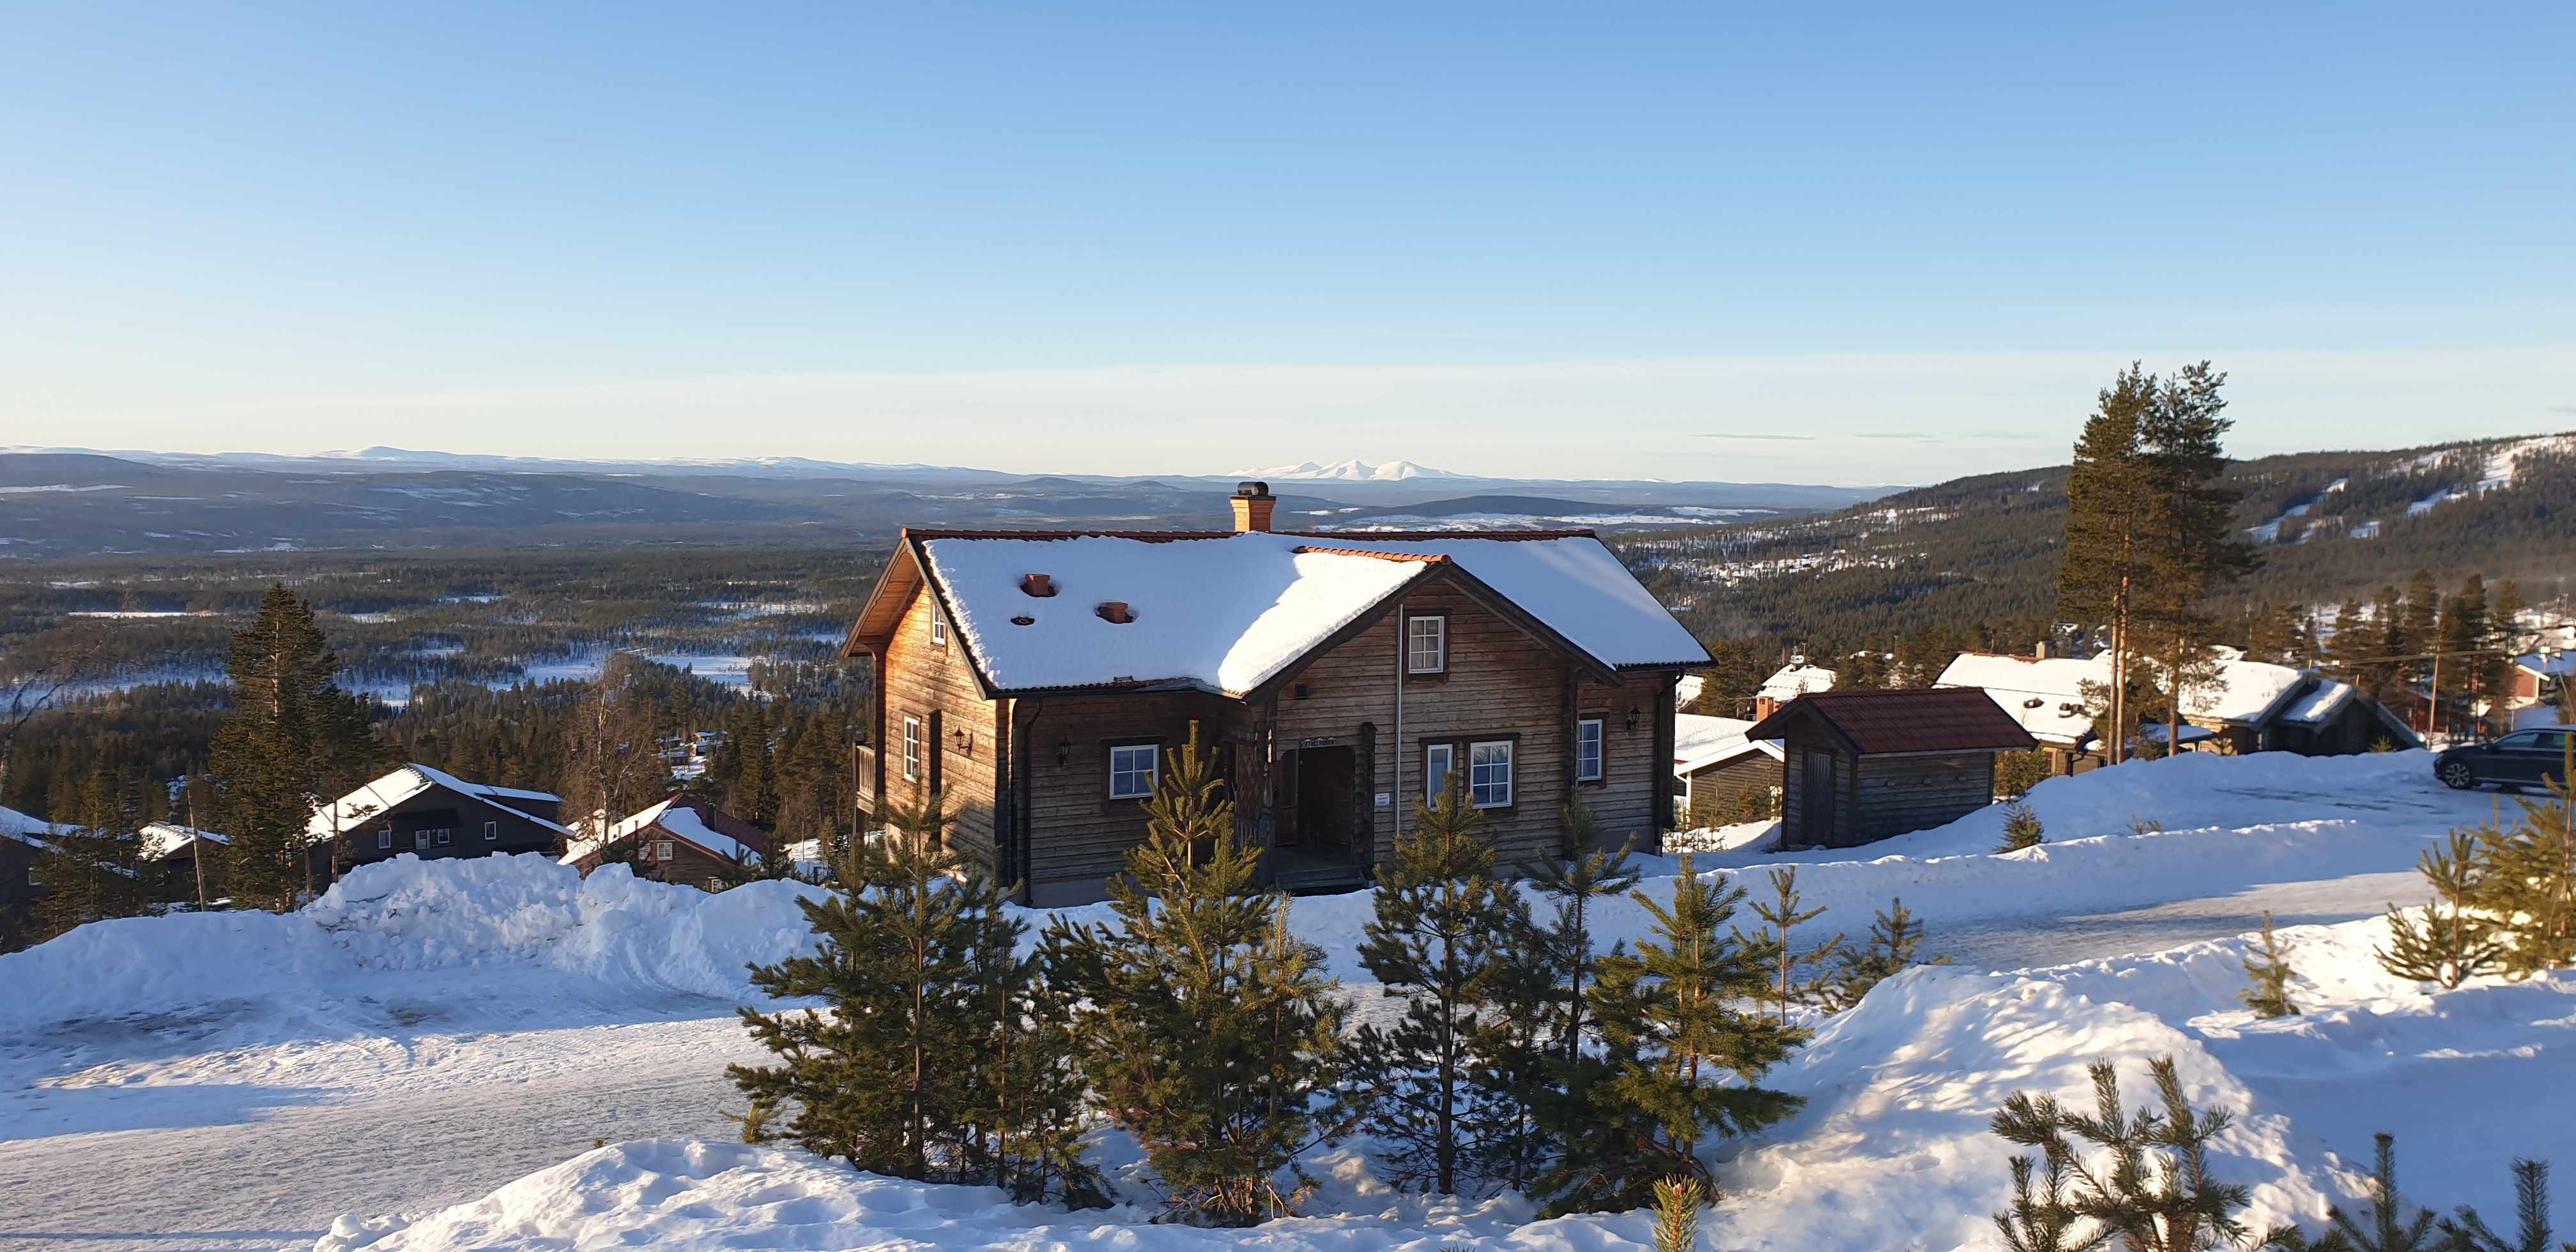 Fjällvidden - A luxurious mountain cabin in Sweden - Nature lodges for Rent in Idre, Dalarna County,